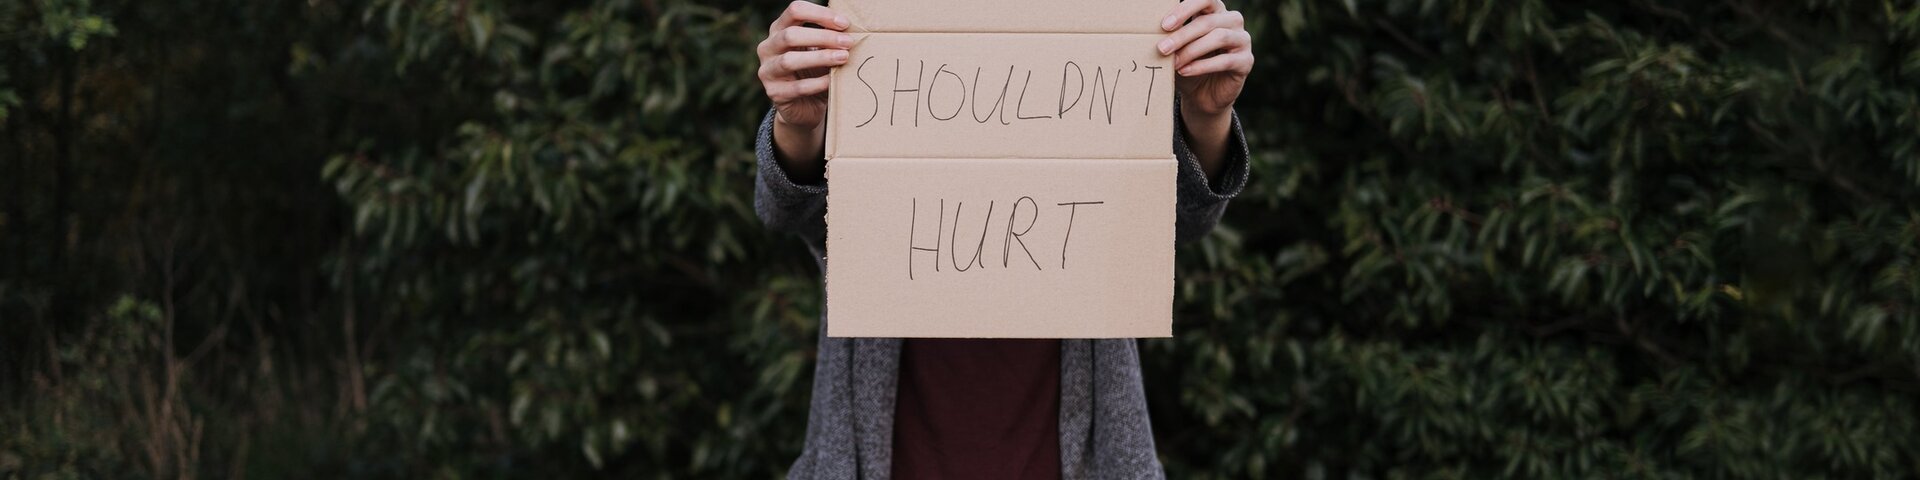 A person holding out a cardboard sign that says "Love shouldn't hurt"